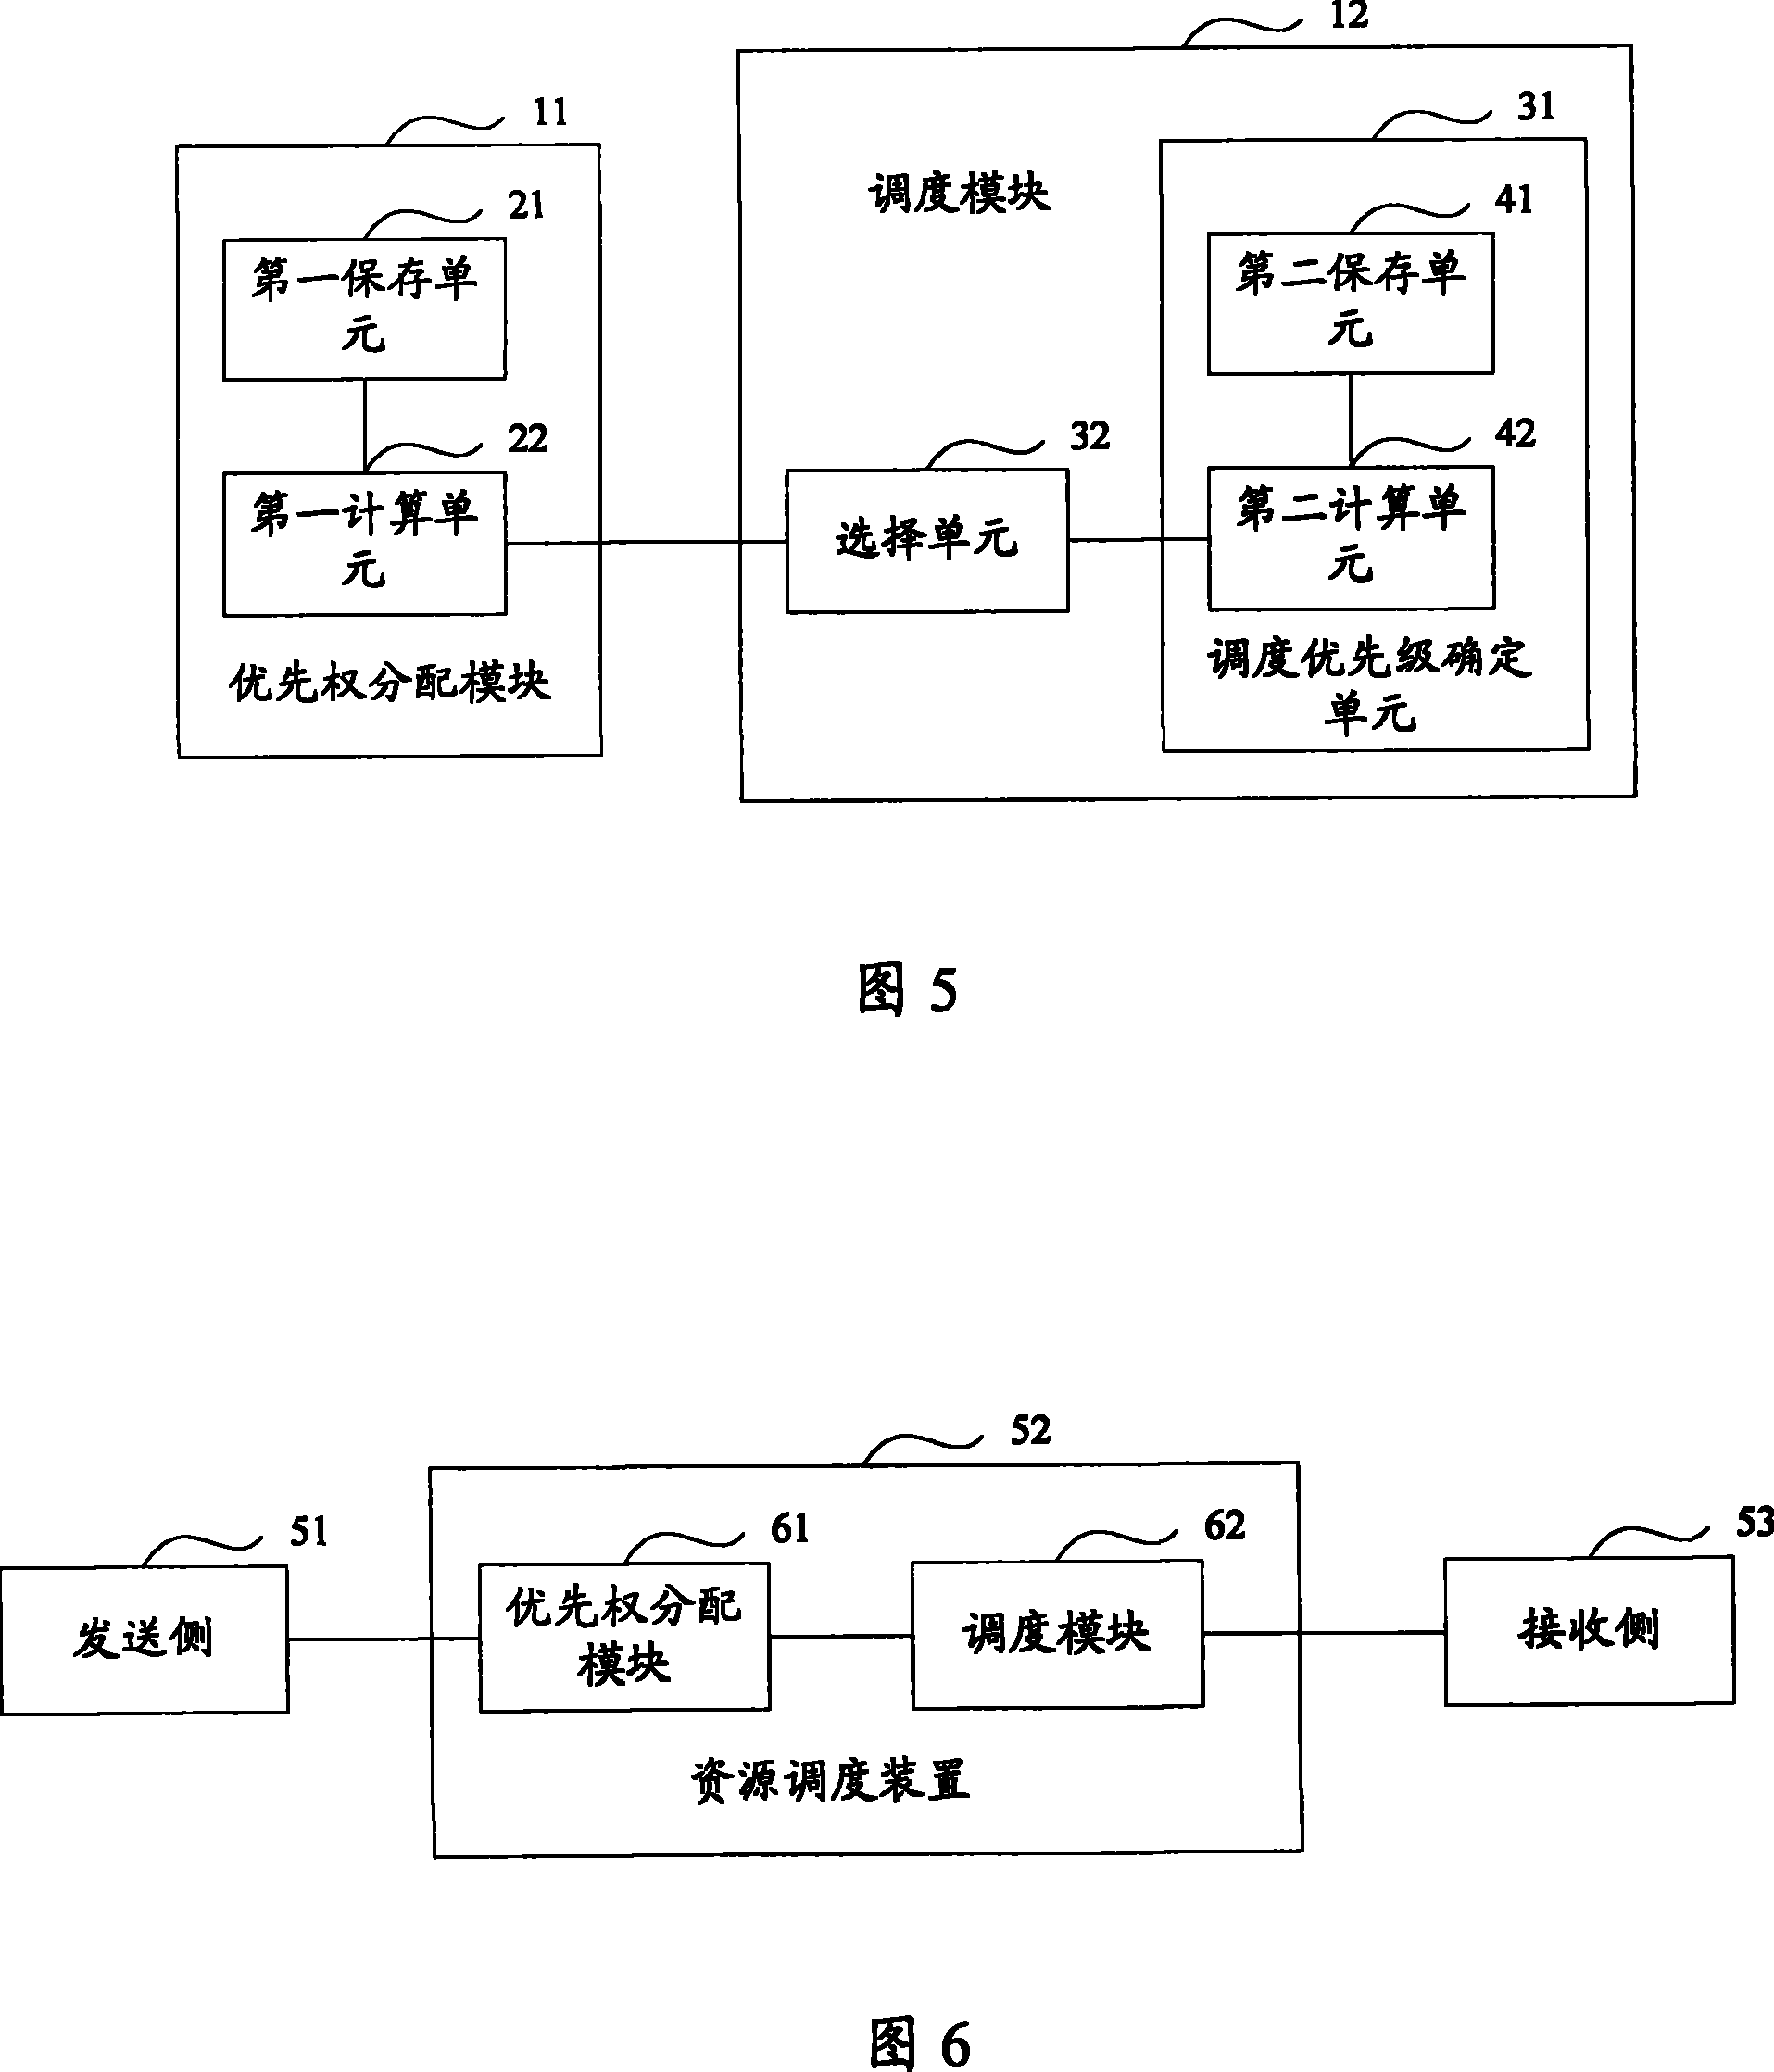 Method, device and communication system for resource scheduling